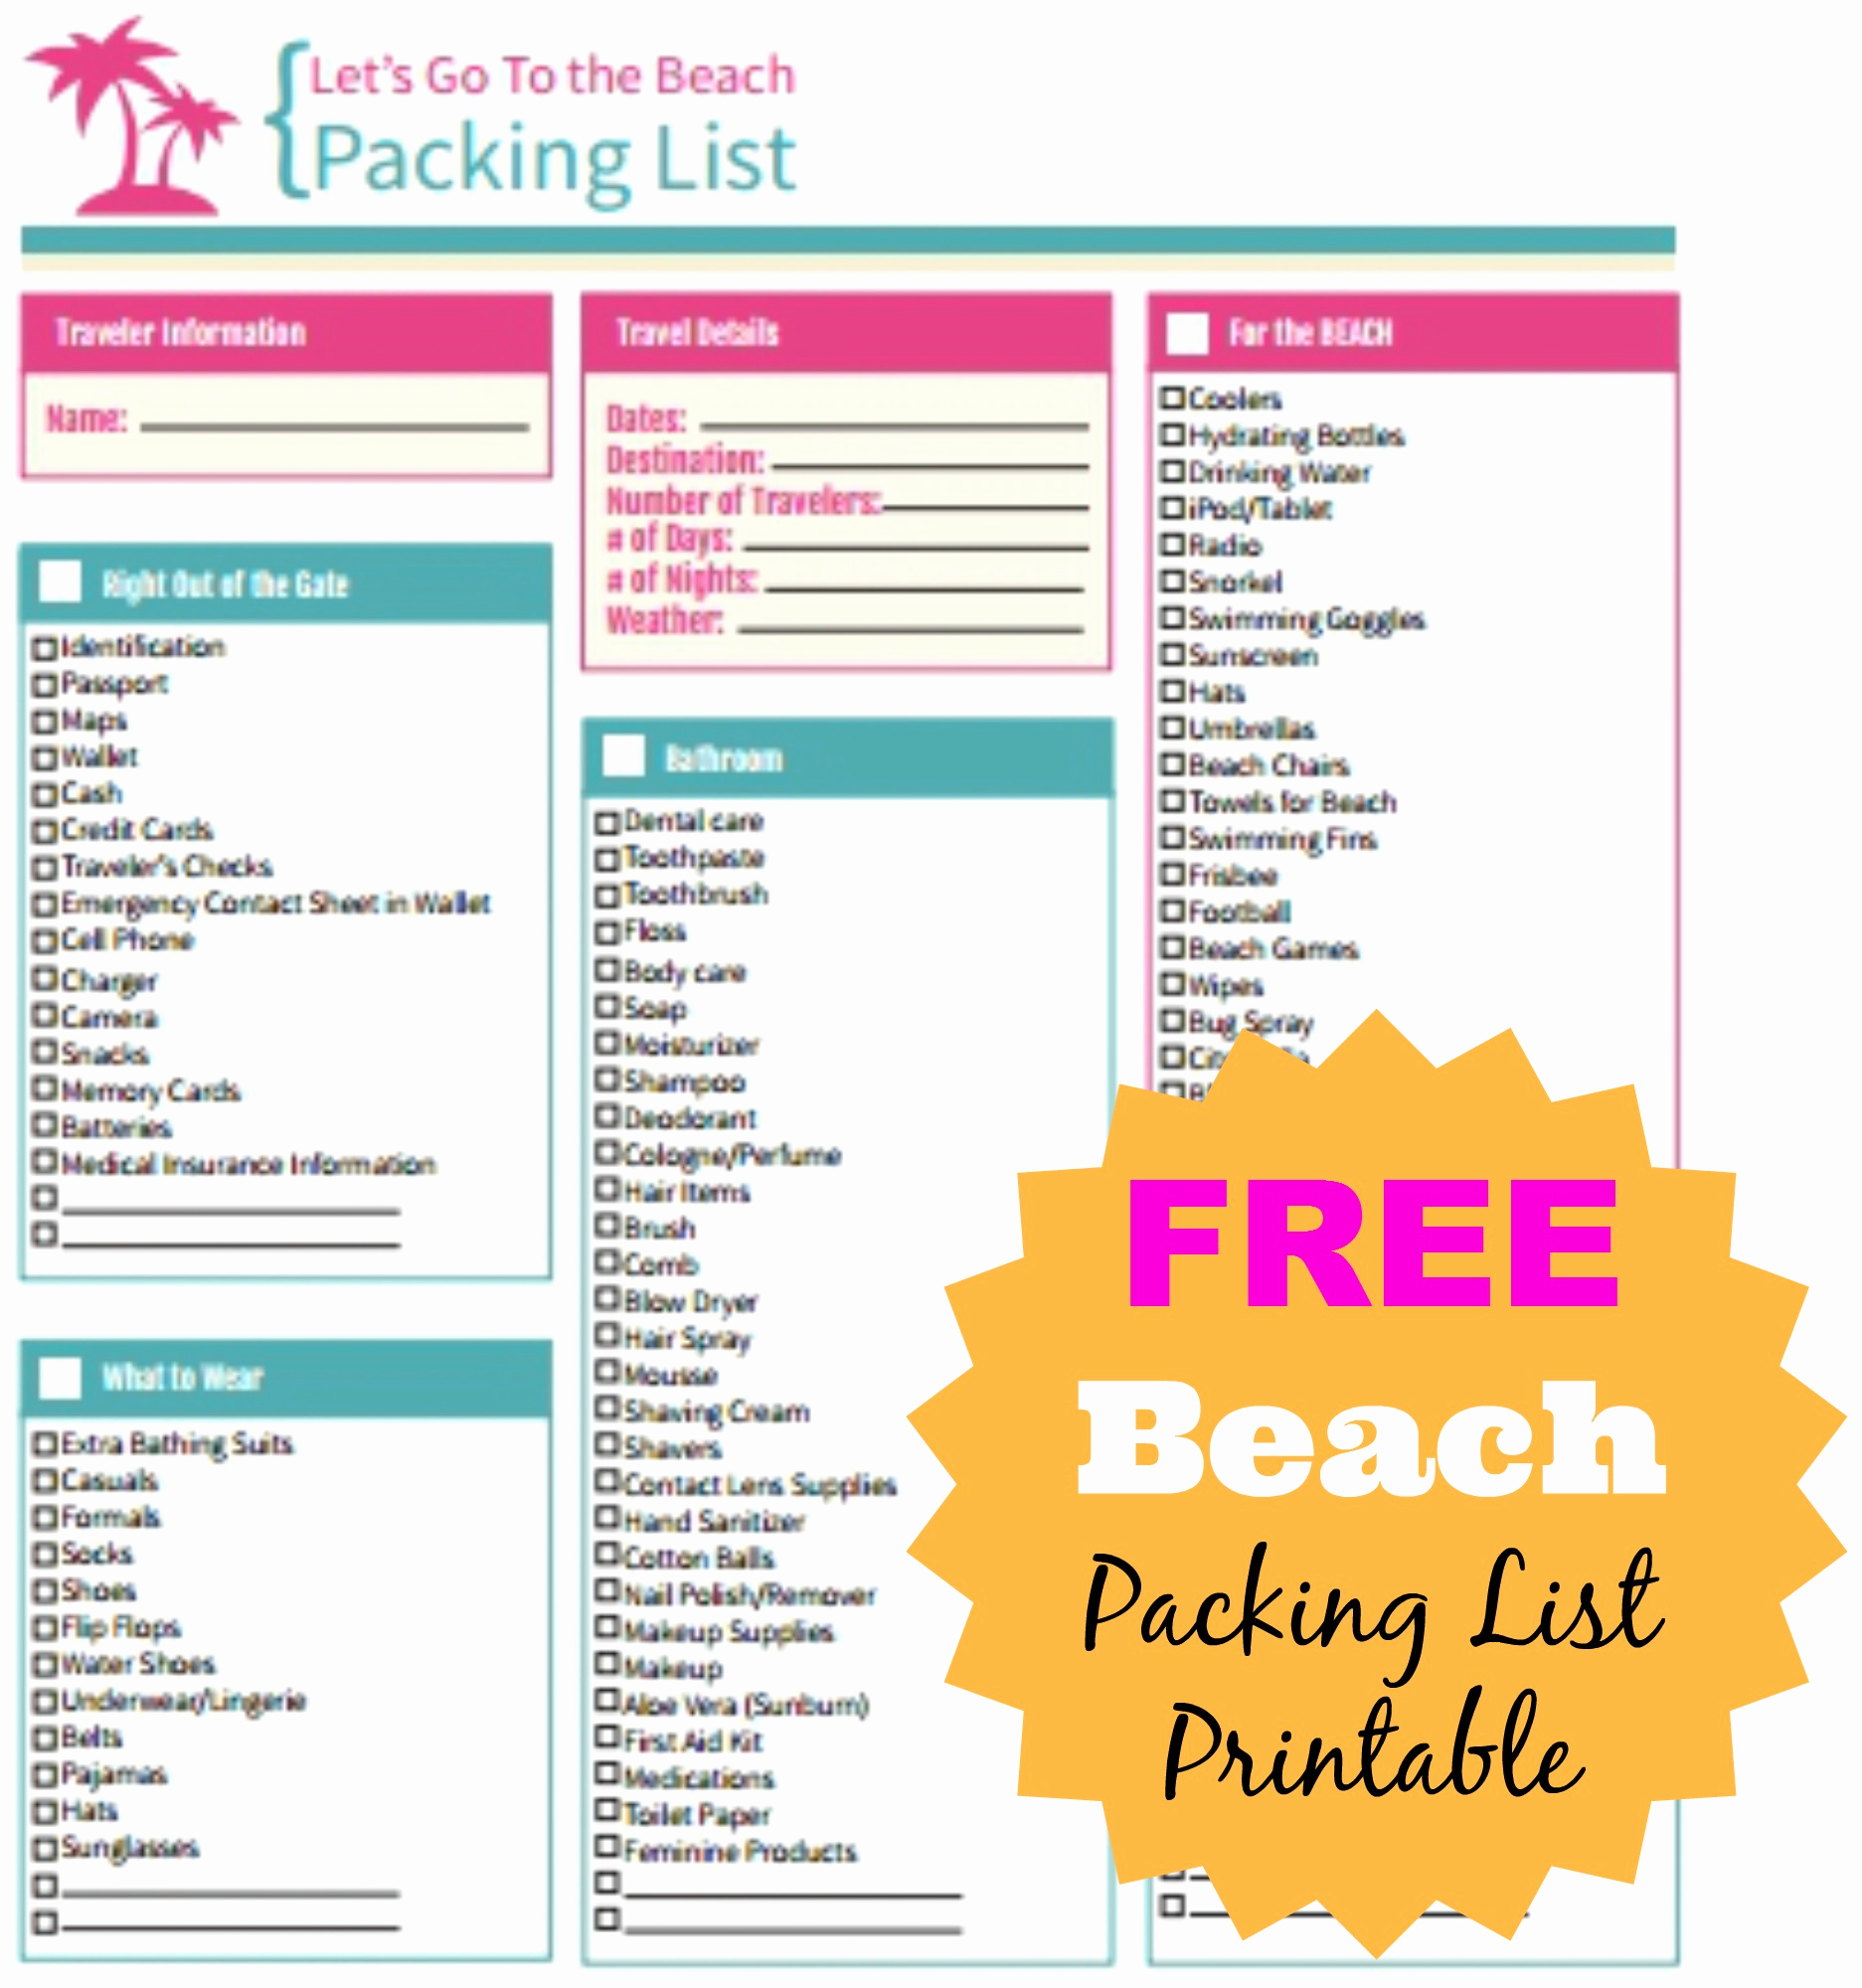 Printable Cruise Packing List Inspirational Free Beach Packing List Printable